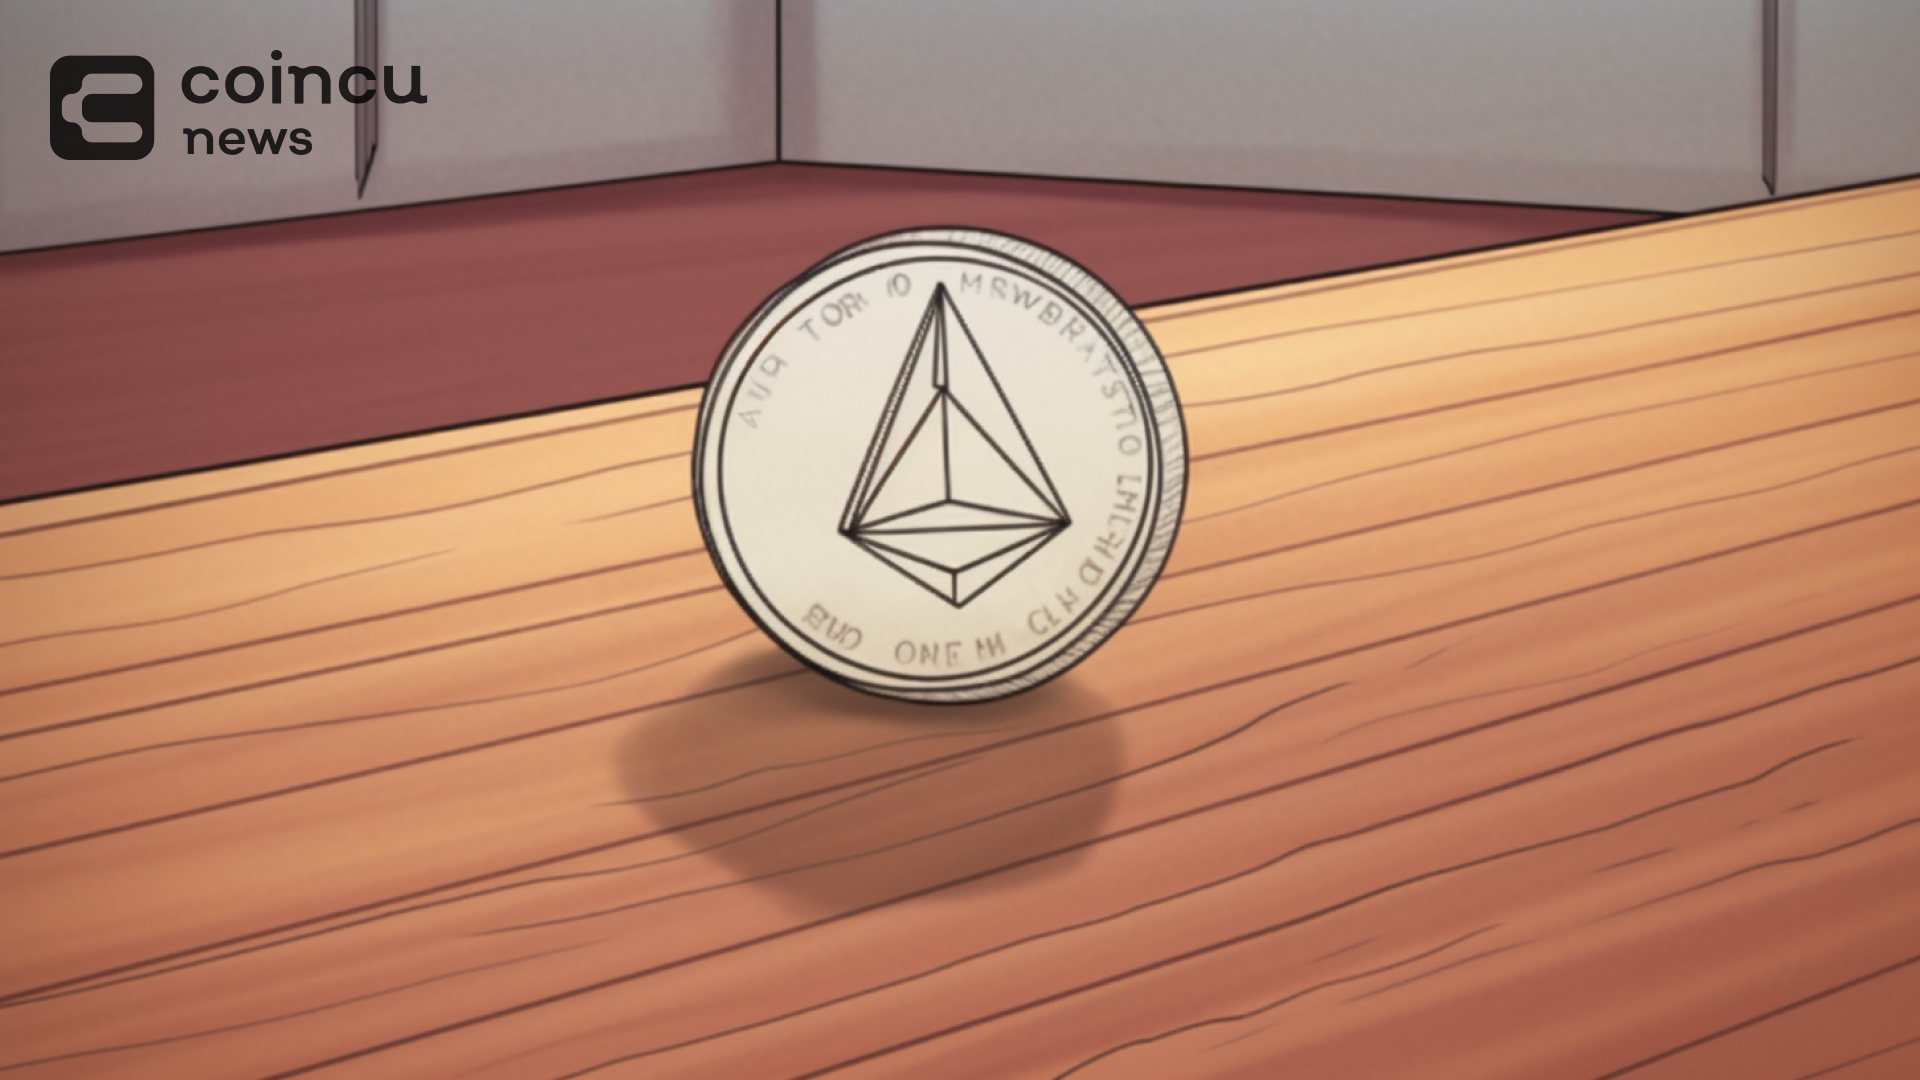 Spot Ethereum ETF 19b-4 Filings Expected To Be Approved This Week